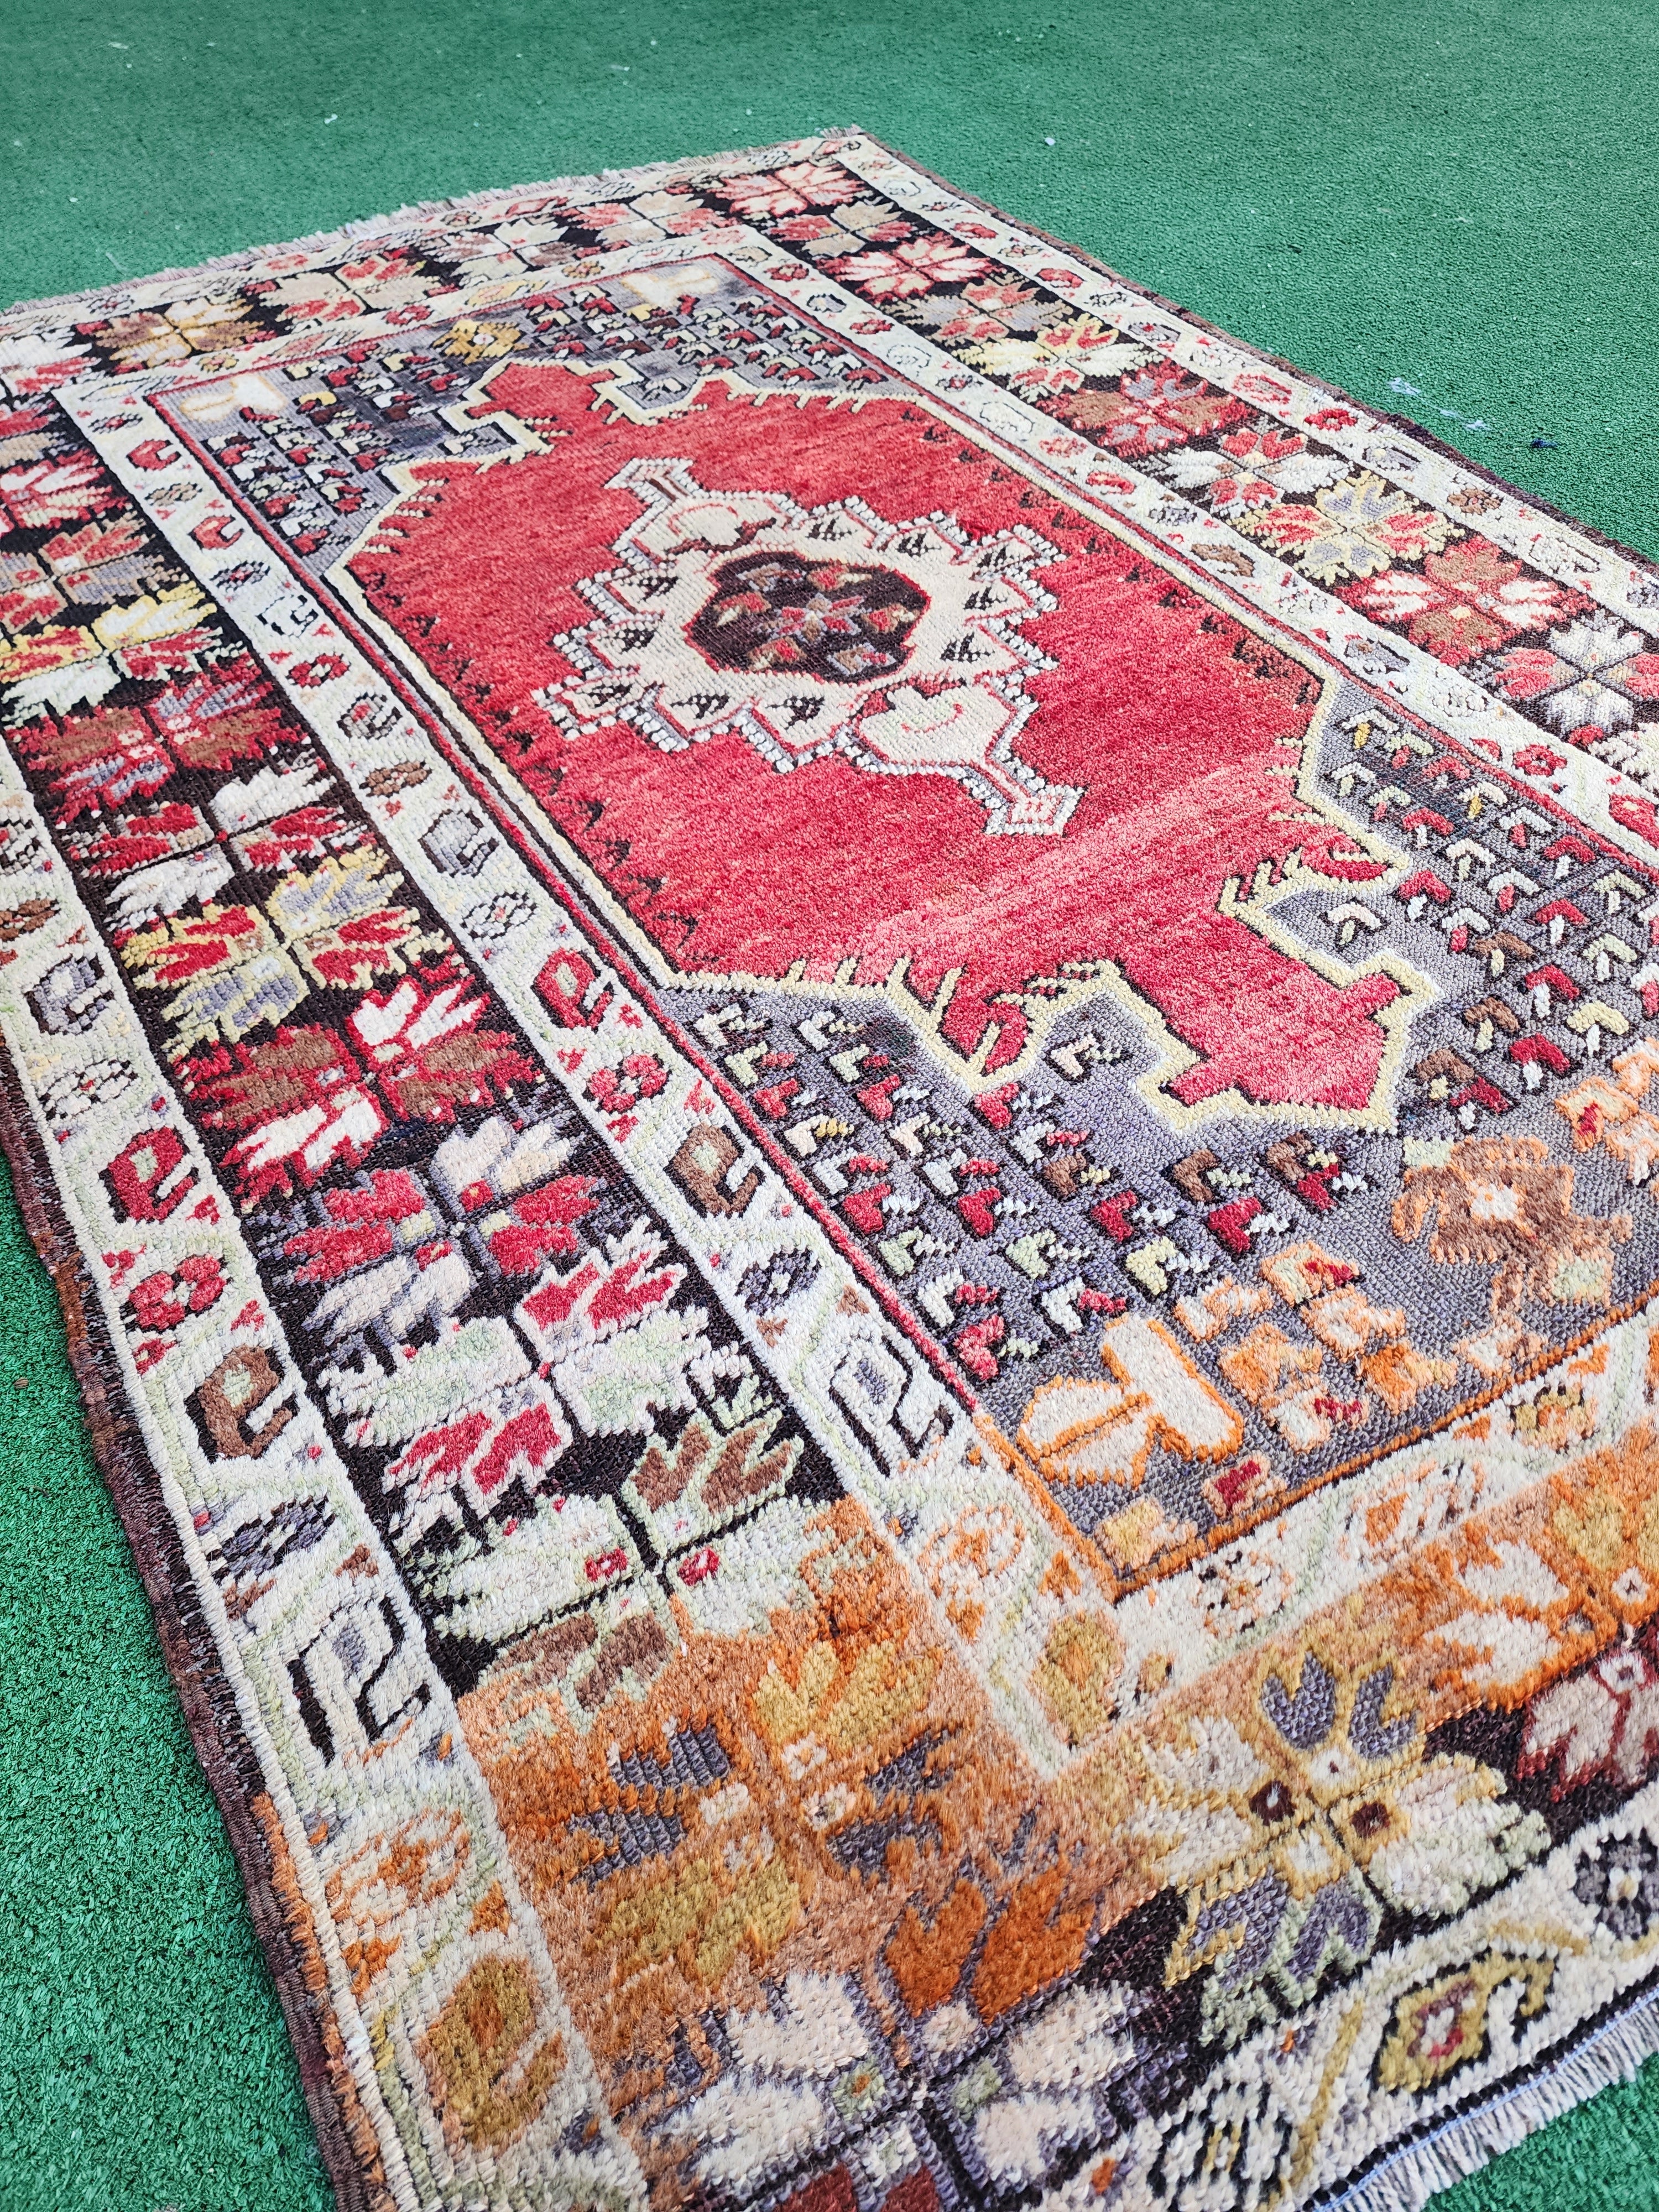 Antique Anatolian Tribal Rug 5'4'' x 3'7'' Red, Blue, Brown and White Traditional Turkish Rug